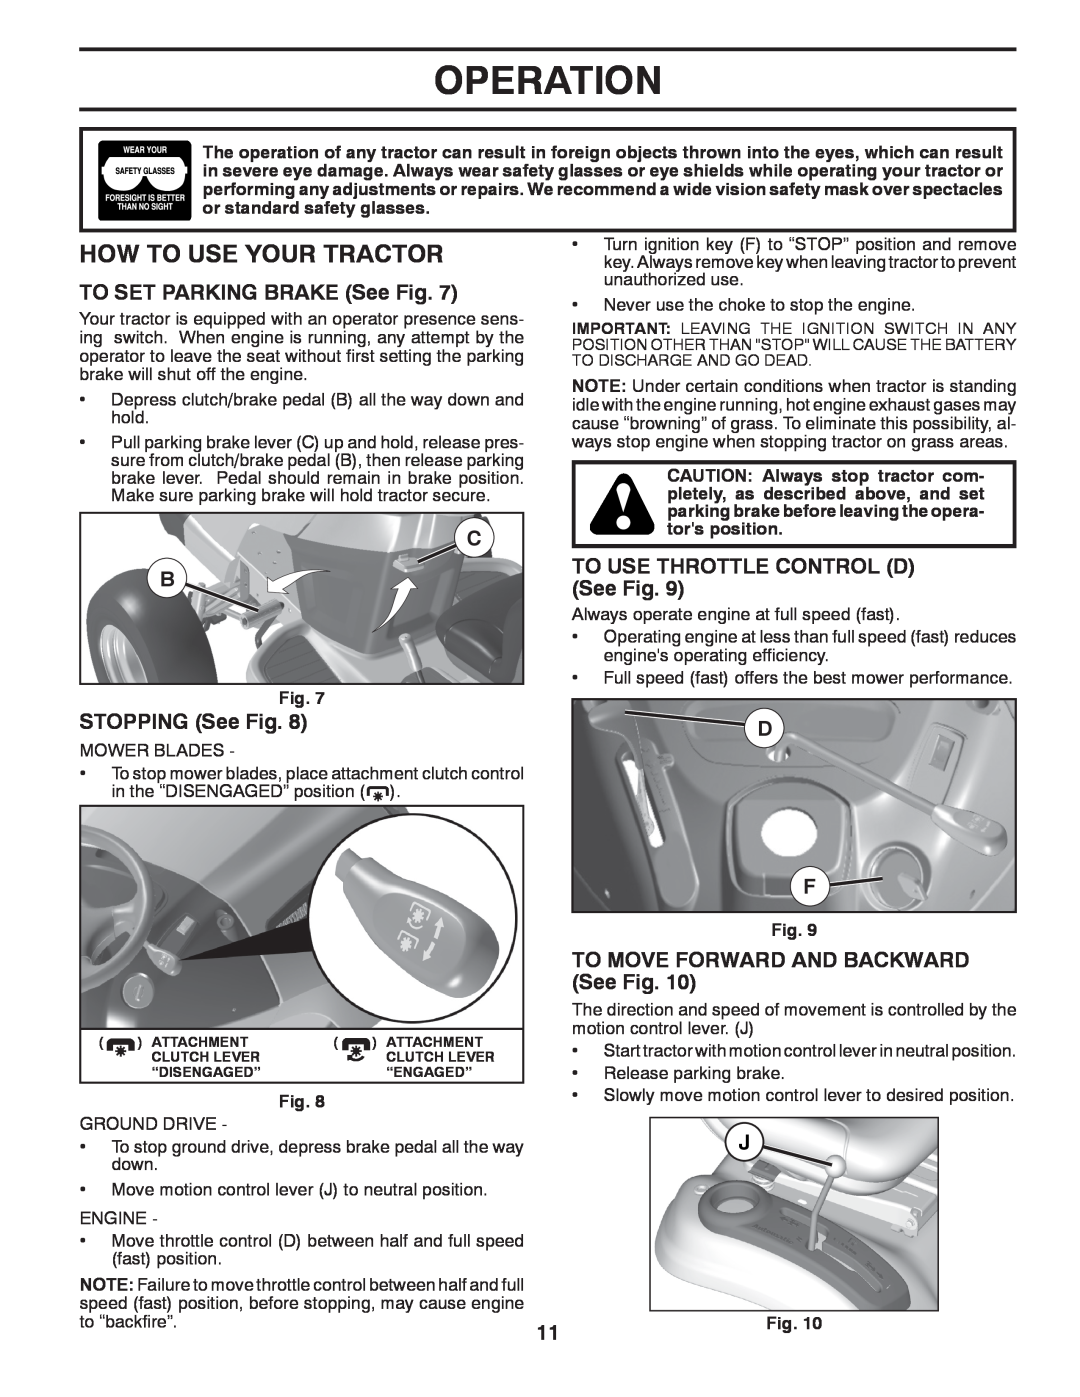 Husqvarna 917.2896 owner manual How To Use Your Tractor, Operation, TO SET PARKING BRAKE See Fig, STOPPING See Fig 